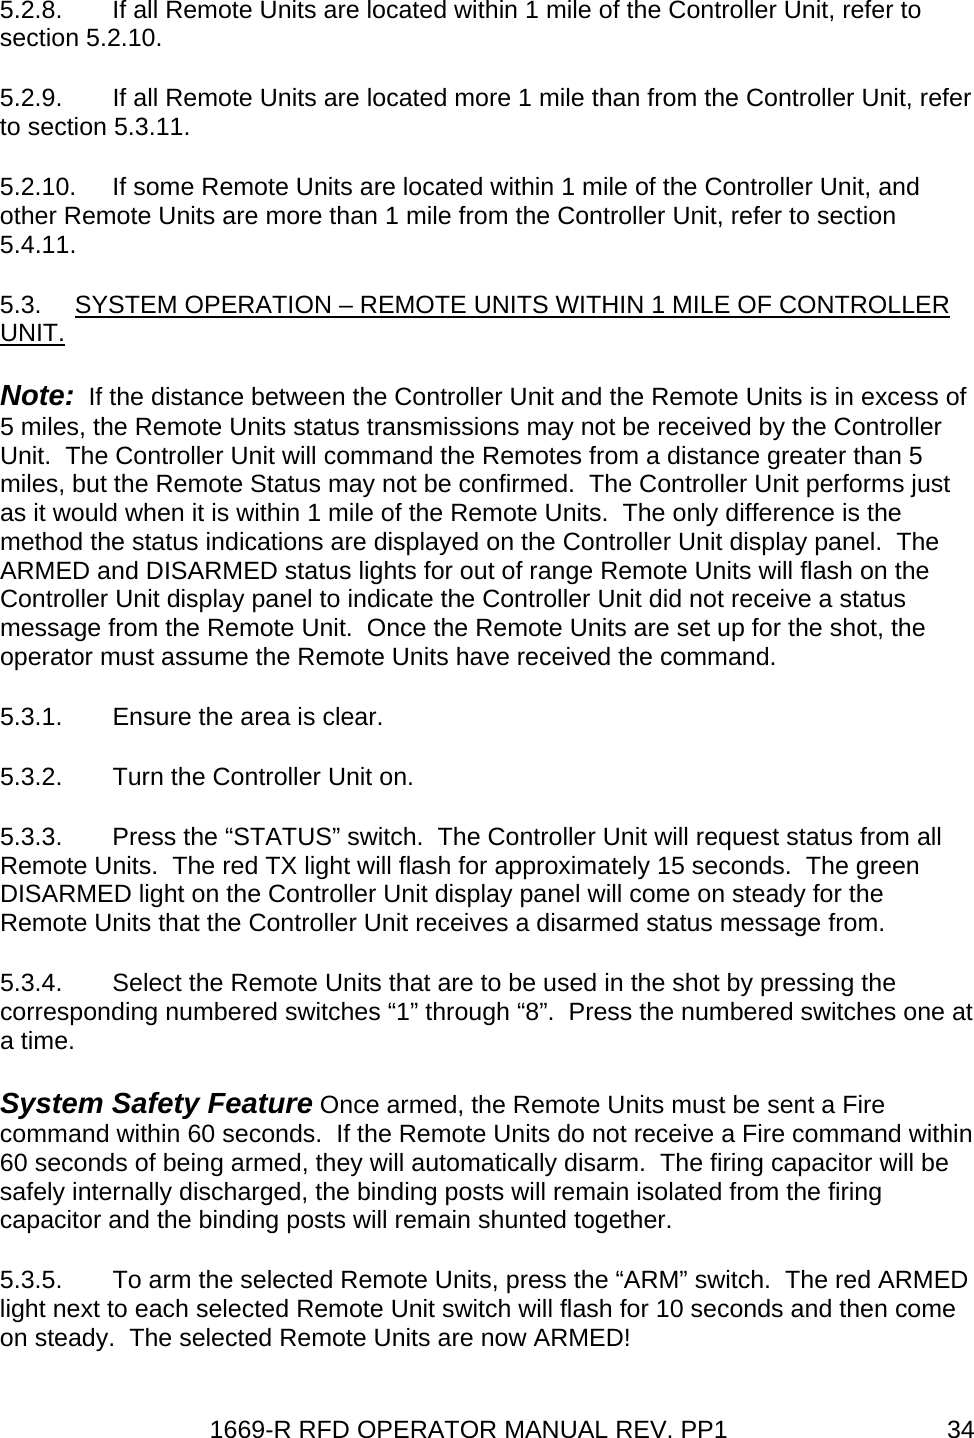 1669-R RFD OPERATOR MANUAL REV. PP1  345.2.8.  If all Remote Units are located within 1 mile of the Controller Unit, refer to section 5.2.10. 5.2.9.  If all Remote Units are located more 1 mile than from the Controller Unit, refer to section 5.3.11. 5.2.10.  If some Remote Units are located within 1 mile of the Controller Unit, and other Remote Units are more than 1 mile from the Controller Unit, refer to section 5.4.11. 5.3.  SYSTEM OPERATION – REMOTE UNITS WITHIN 1 MILE OF CONTROLLER UNIT. Note:  If the distance between the Controller Unit and the Remote Units is in excess of 5 miles, the Remote Units status transmissions may not be received by the Controller Unit.  The Controller Unit will command the Remotes from a distance greater than 5 miles, but the Remote Status may not be confirmed.  The Controller Unit performs just as it would when it is within 1 mile of the Remote Units.  The only difference is the method the status indications are displayed on the Controller Unit display panel.  The ARMED and DISARMED status lights for out of range Remote Units will flash on the Controller Unit display panel to indicate the Controller Unit did not receive a status message from the Remote Unit.  Once the Remote Units are set up for the shot, the operator must assume the Remote Units have received the command. 5.3.1.  Ensure the area is clear. 5.3.2.  Turn the Controller Unit on. 5.3.3.  Press the “STATUS” switch.  The Controller Unit will request status from all Remote Units.  The red TX light will flash for approximately 15 seconds.  The green DISARMED light on the Controller Unit display panel will come on steady for the Remote Units that the Controller Unit receives a disarmed status message from. 5.3.4.  Select the Remote Units that are to be used in the shot by pressing the corresponding numbered switches “1” through “8”.  Press the numbered switches one at a time. System Safety Feature Once armed, the Remote Units must be sent a Fire command within 60 seconds.  If the Remote Units do not receive a Fire command within 60 seconds of being armed, they will automatically disarm.  The firing capacitor will be safely internally discharged, the binding posts will remain isolated from the firing capacitor and the binding posts will remain shunted together. 5.3.5.  To arm the selected Remote Units, press the “ARM” switch.  The red ARMED light next to each selected Remote Unit switch will flash for 10 seconds and then come on steady.  The selected Remote Units are now ARMED! 